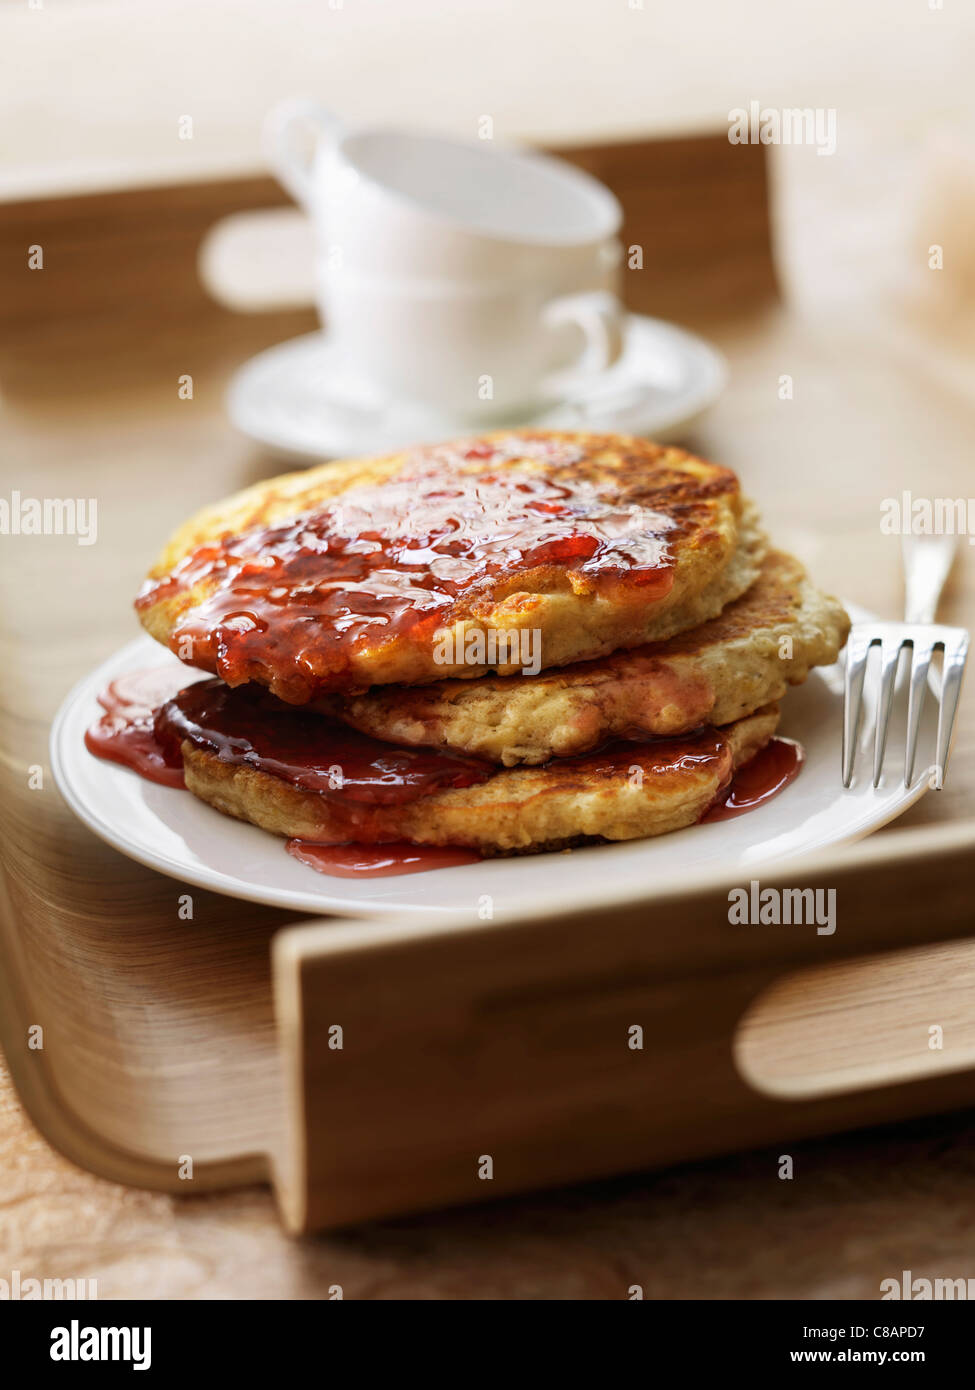 Oat flake pancakes with maple syrup Stock Photo